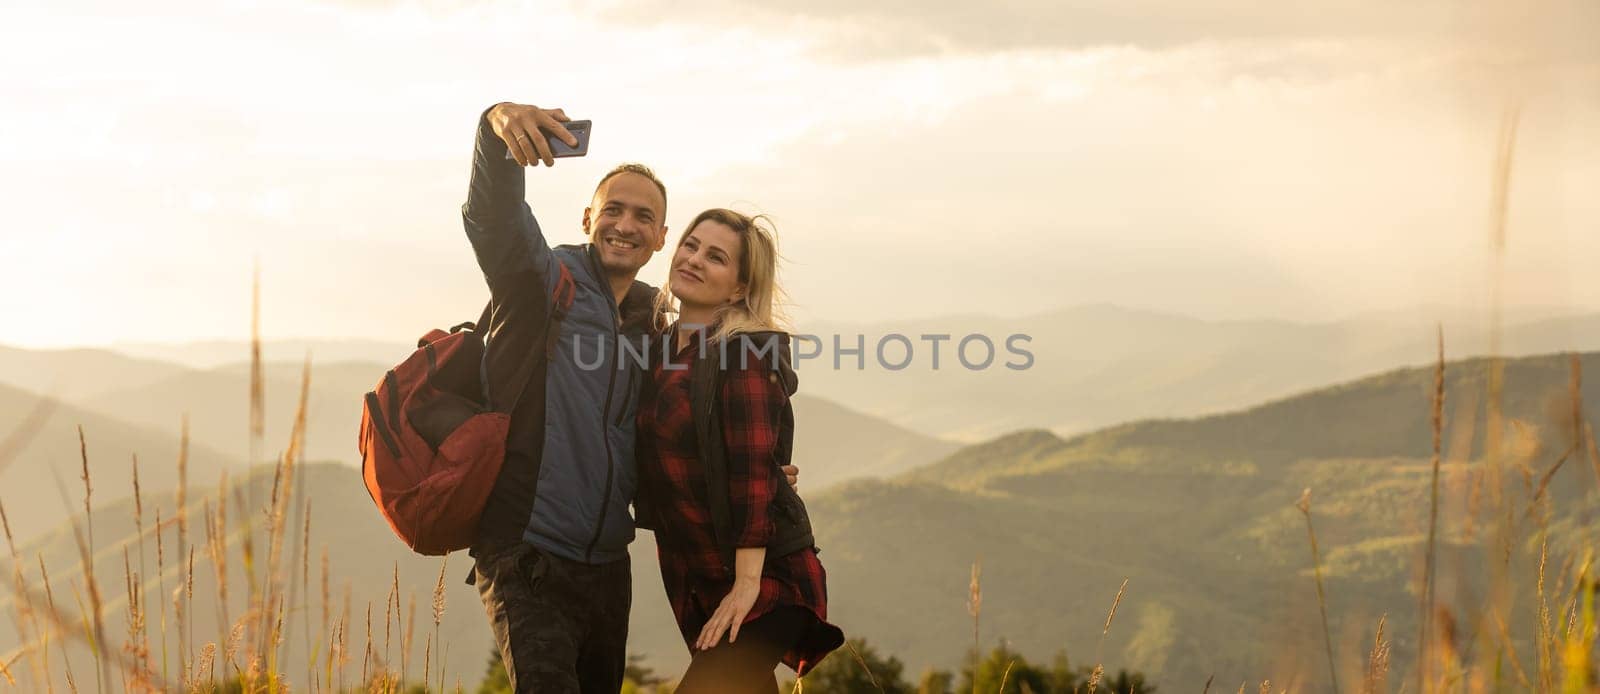 Happy traveler young couple resting in the mountains at sunset in spring or summer season